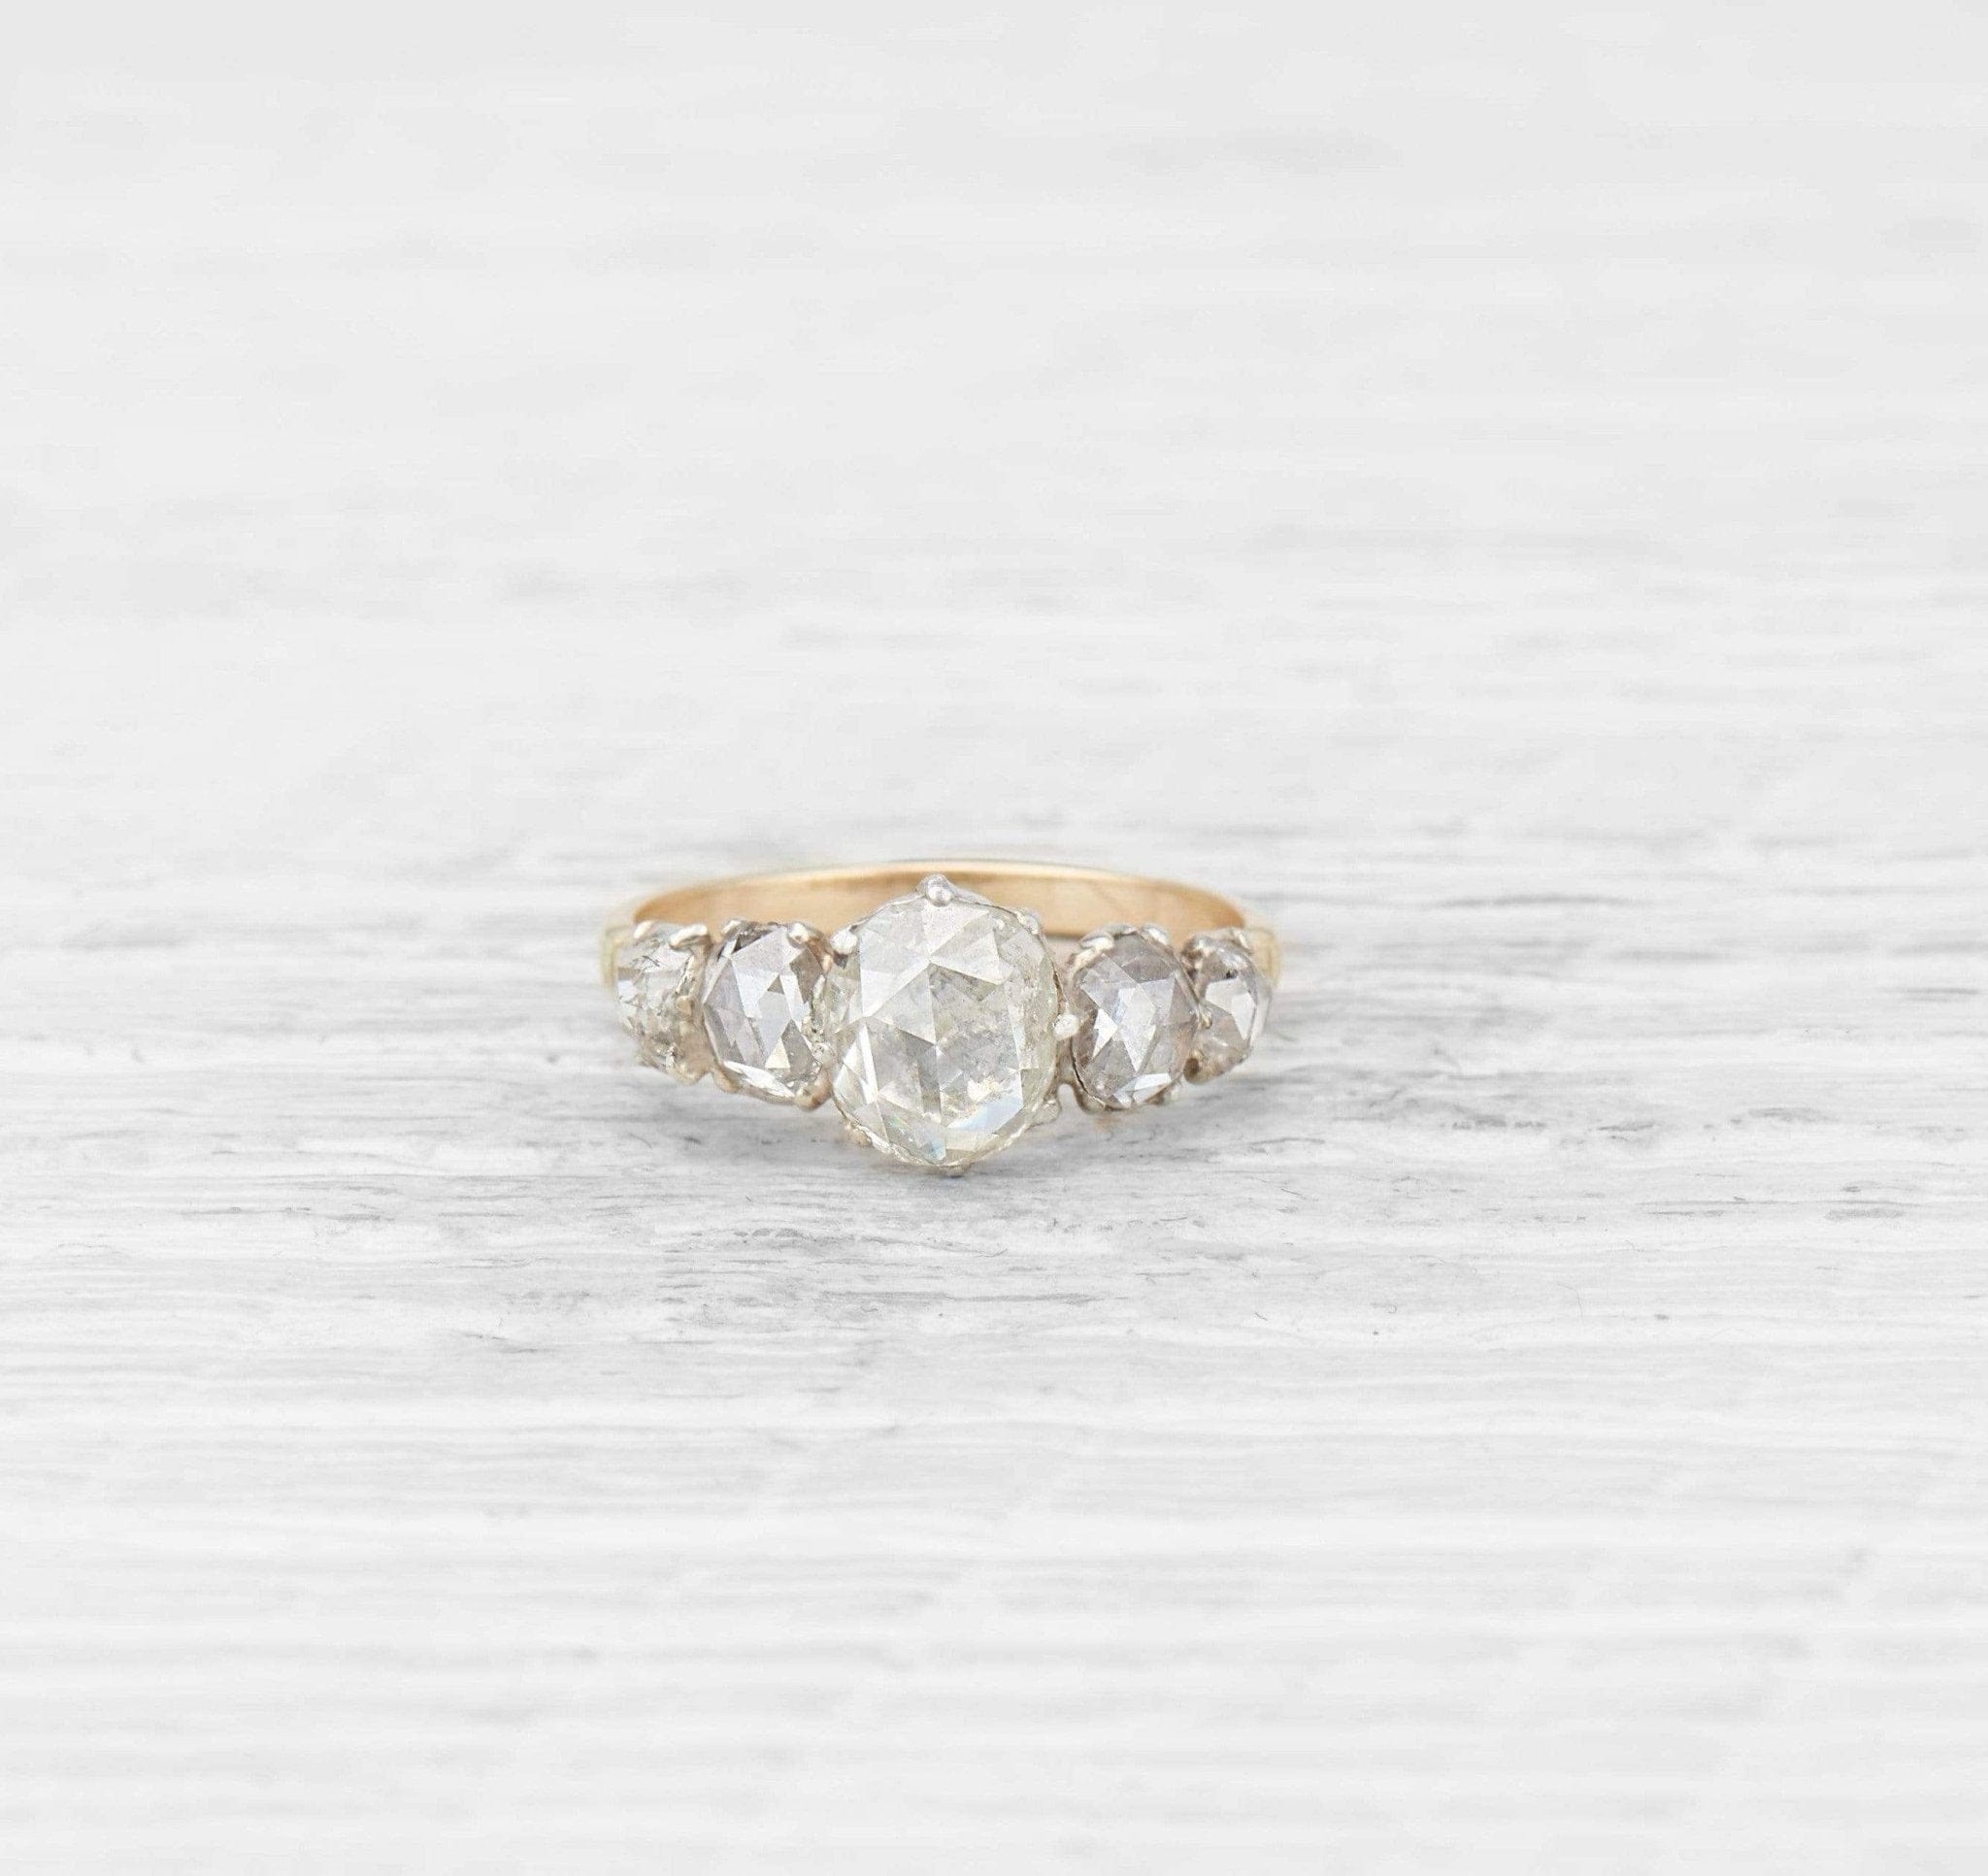 RARE ANTIQUE GEORGIAN DIAMOND SOLITAIRE RING, in high carat gold and  silver. Set with a large love